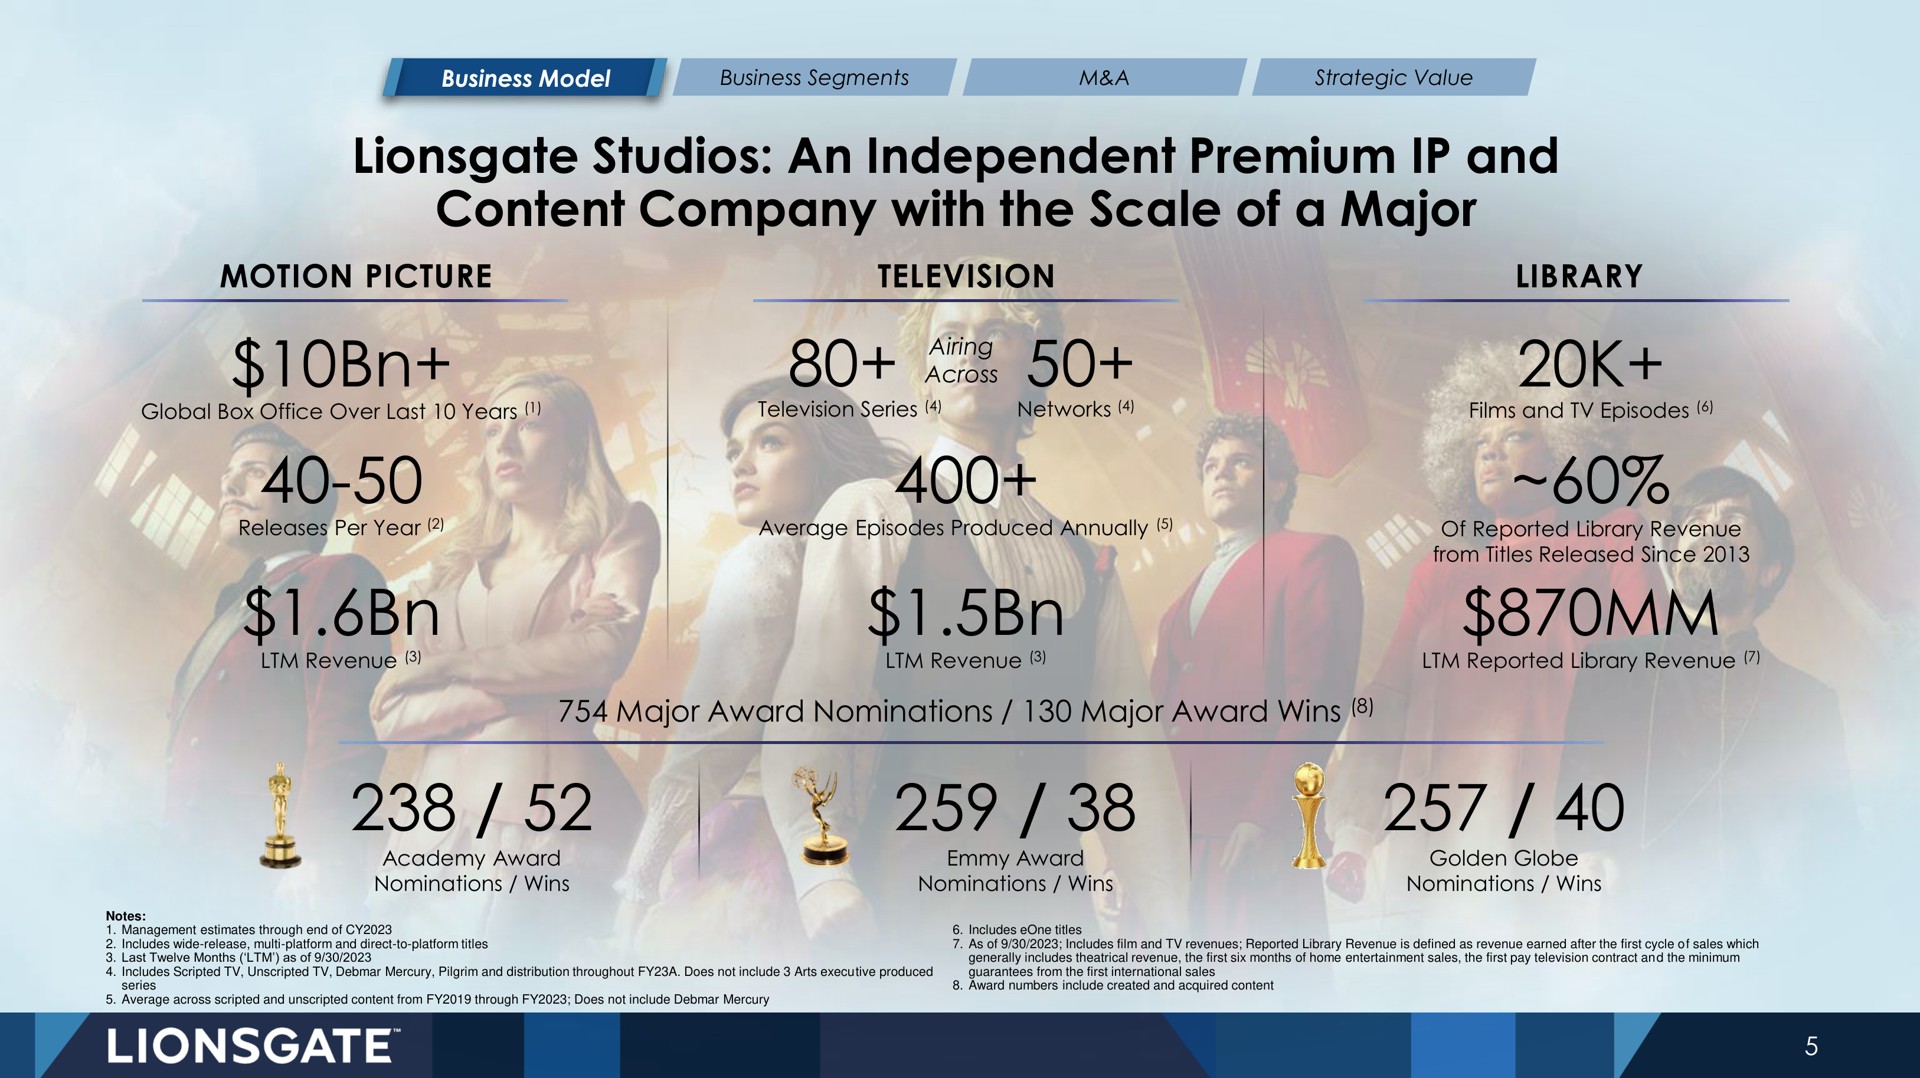 studios an independent premium and content company with the scale of a major ava | Lionsgate